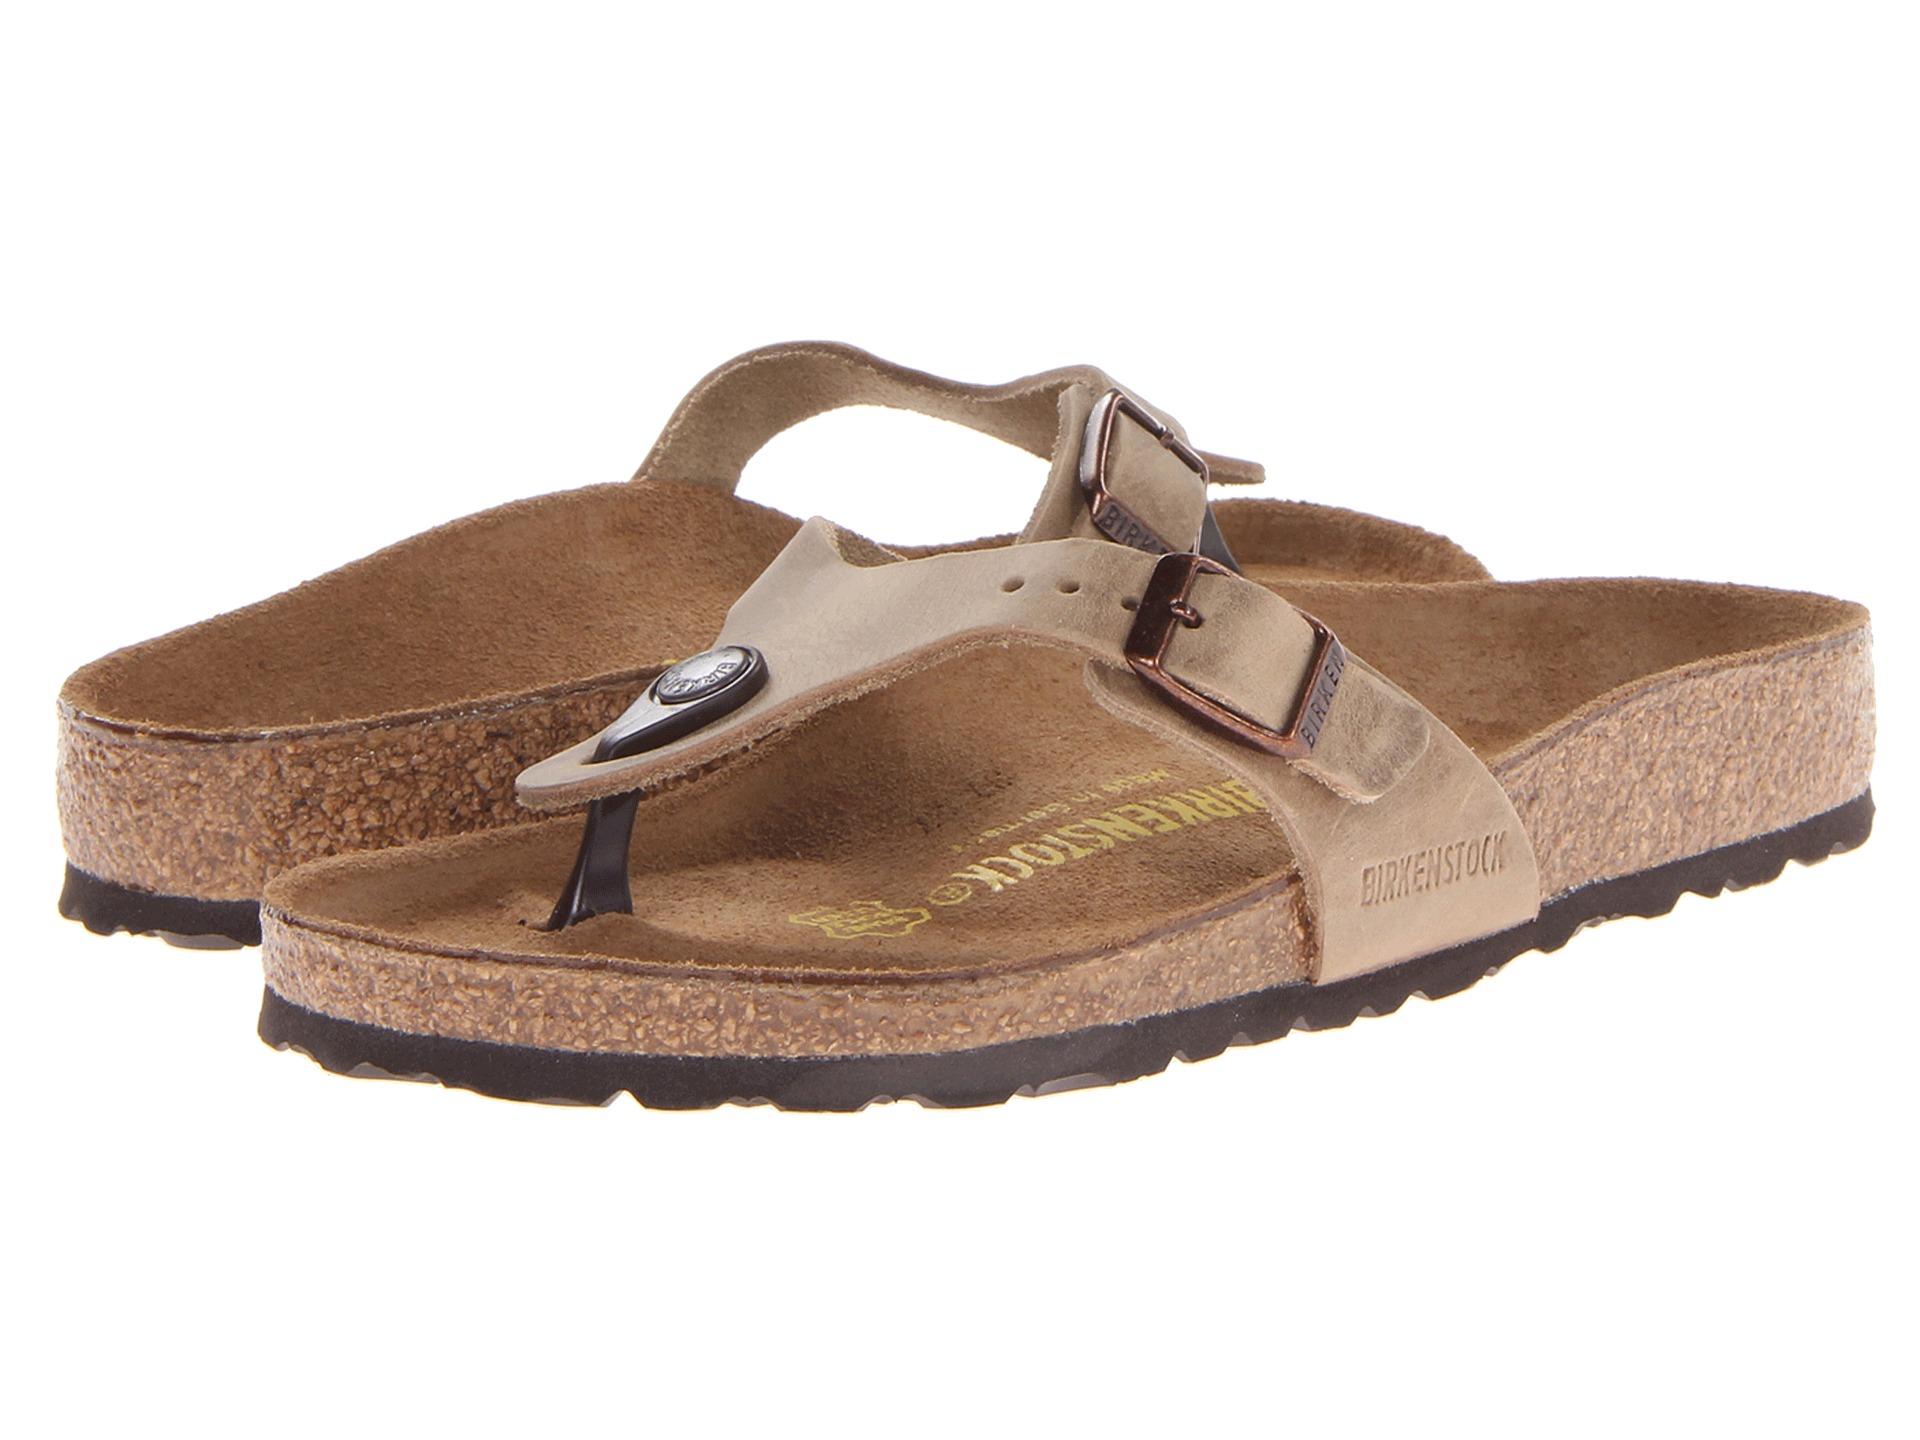 Birkenstock Turin Unisex Tobacco Oiled Leather, Shoes | Shipped Free ...